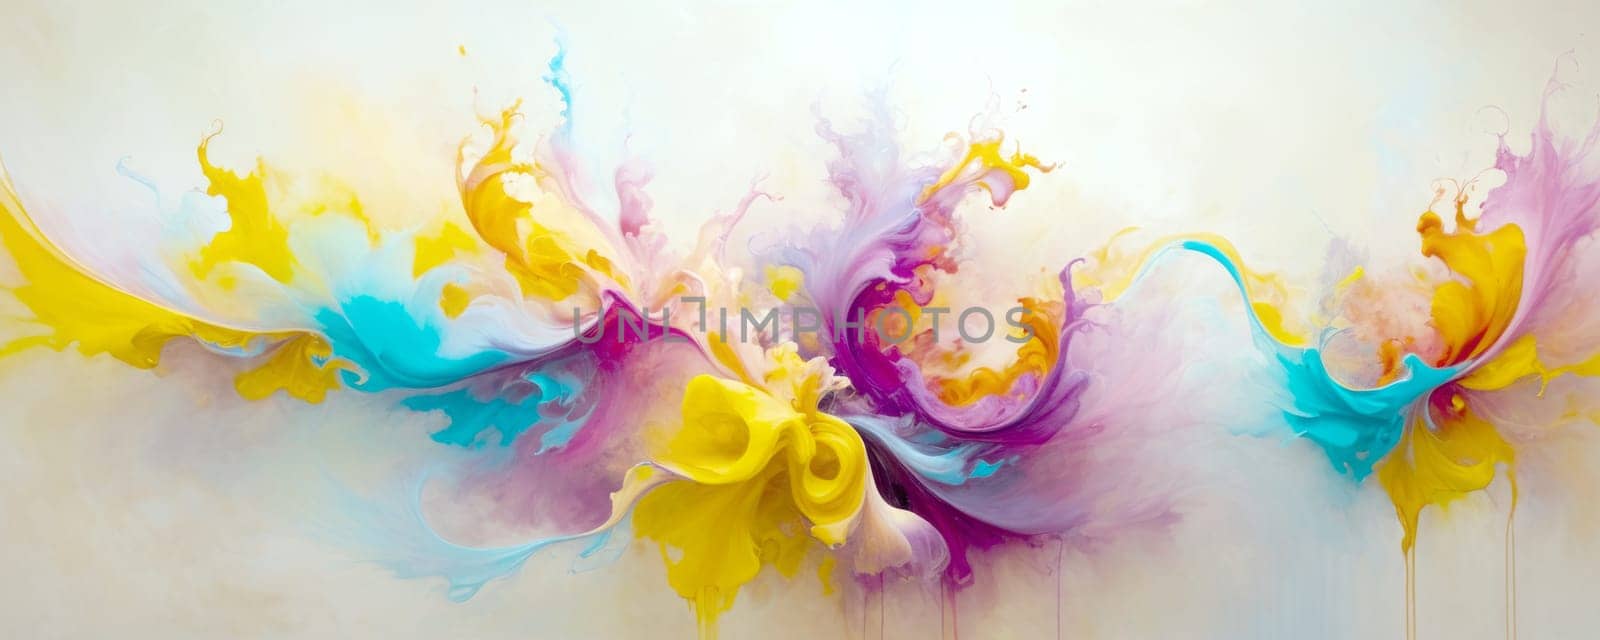 An abstract explosion of vibrant colors against a light background. Swirls of yellow, blue, pink, and purple paint appear to be in motion, creating a dynamic and fluid visual effect. The colors are bright and saturated, giving the artwork a lively and energetic feel. There are no distinct shapes or objects. Instead, the focus is on the interplay of colors and forms. The composition is balanced with bursts of color spreading outward from the center. Generative AI